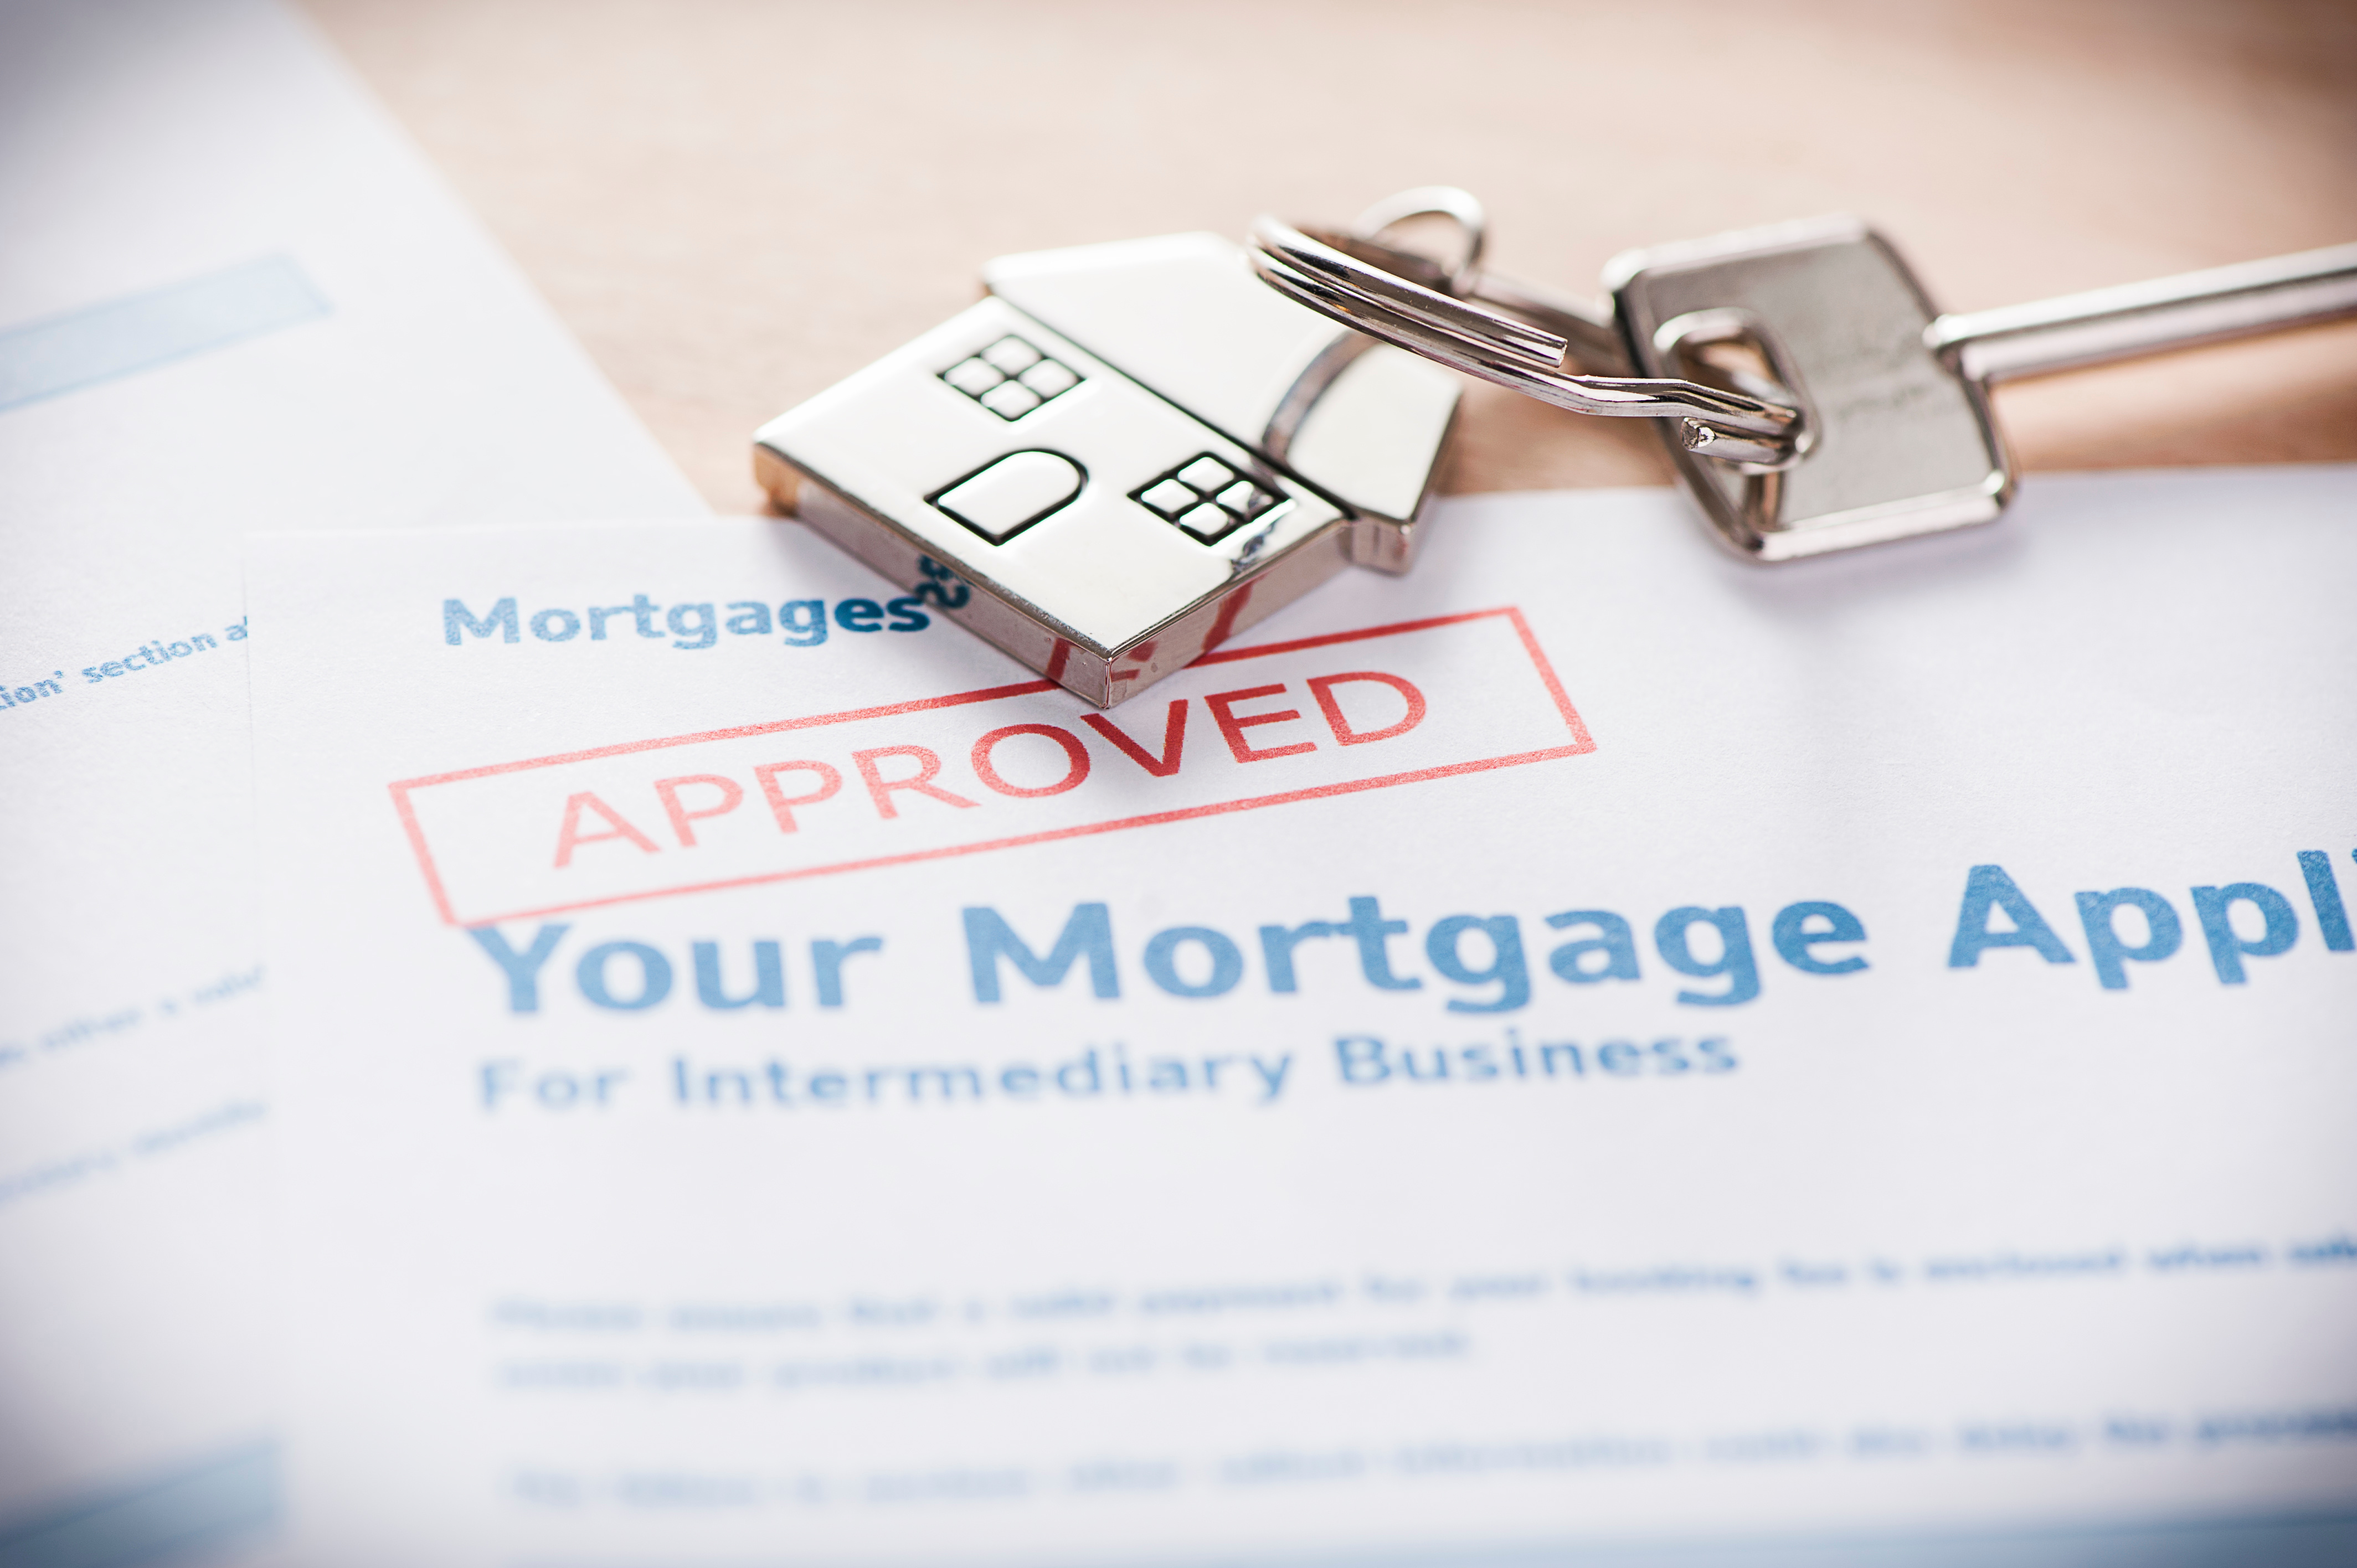 Learn what is your LTV and LCR to improve your chances of getting your loan approved! Source: Adobe Stock.